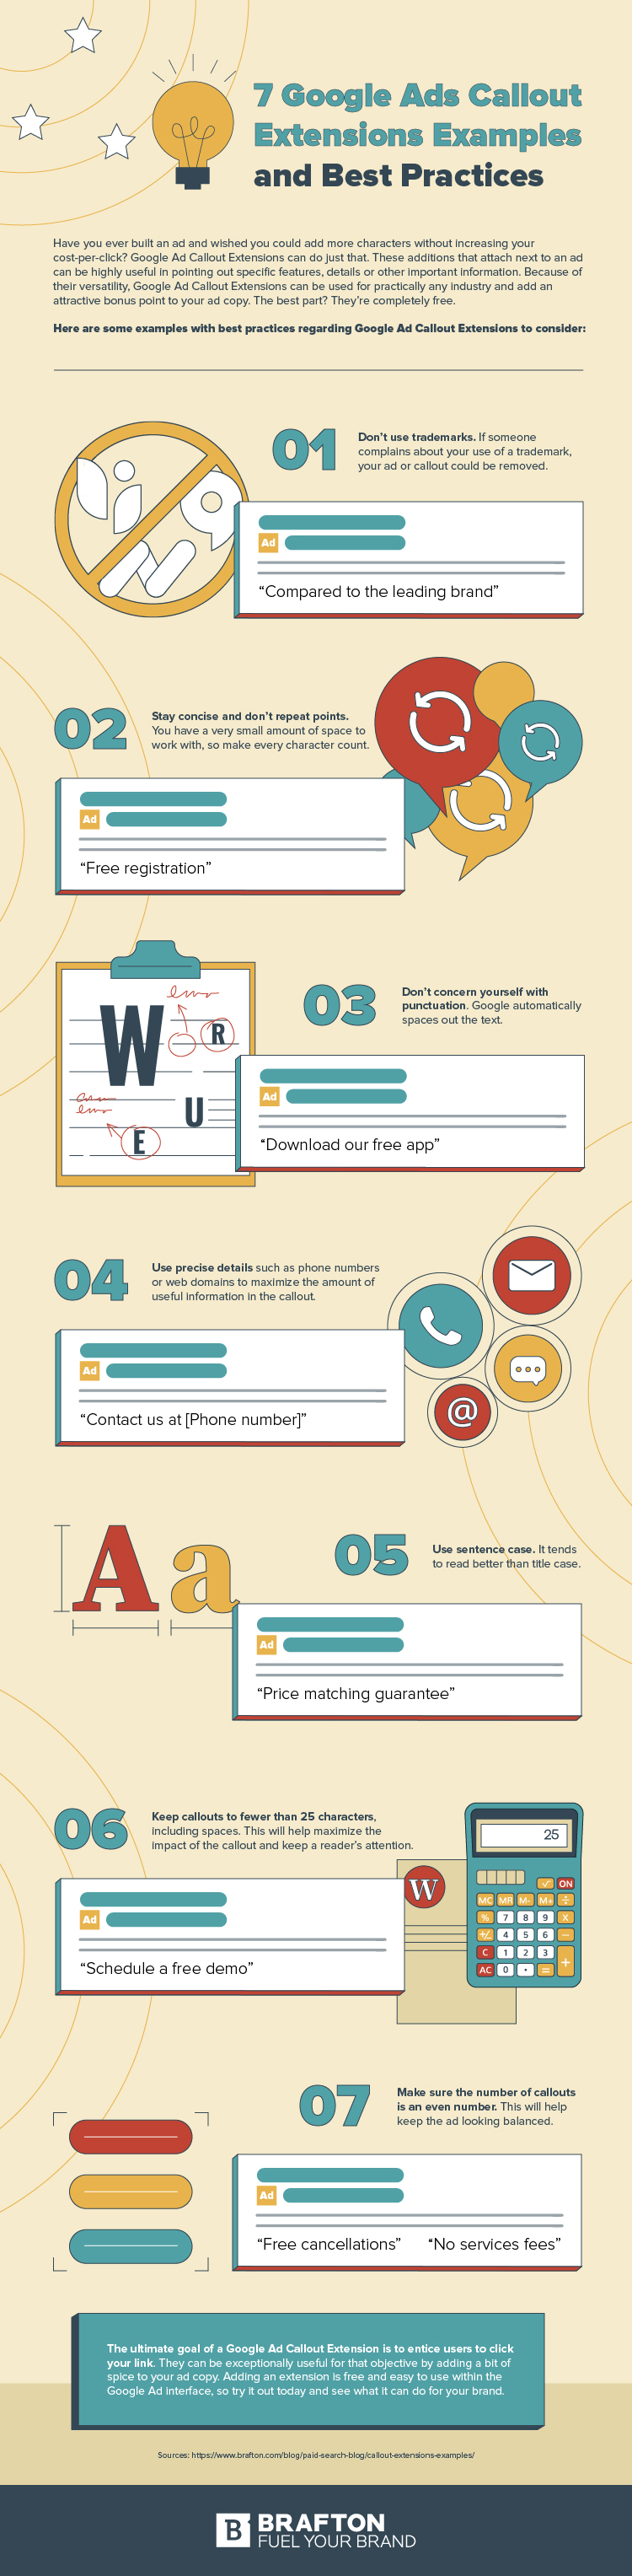 7 Google ads callout extensions examples and best practices infographic